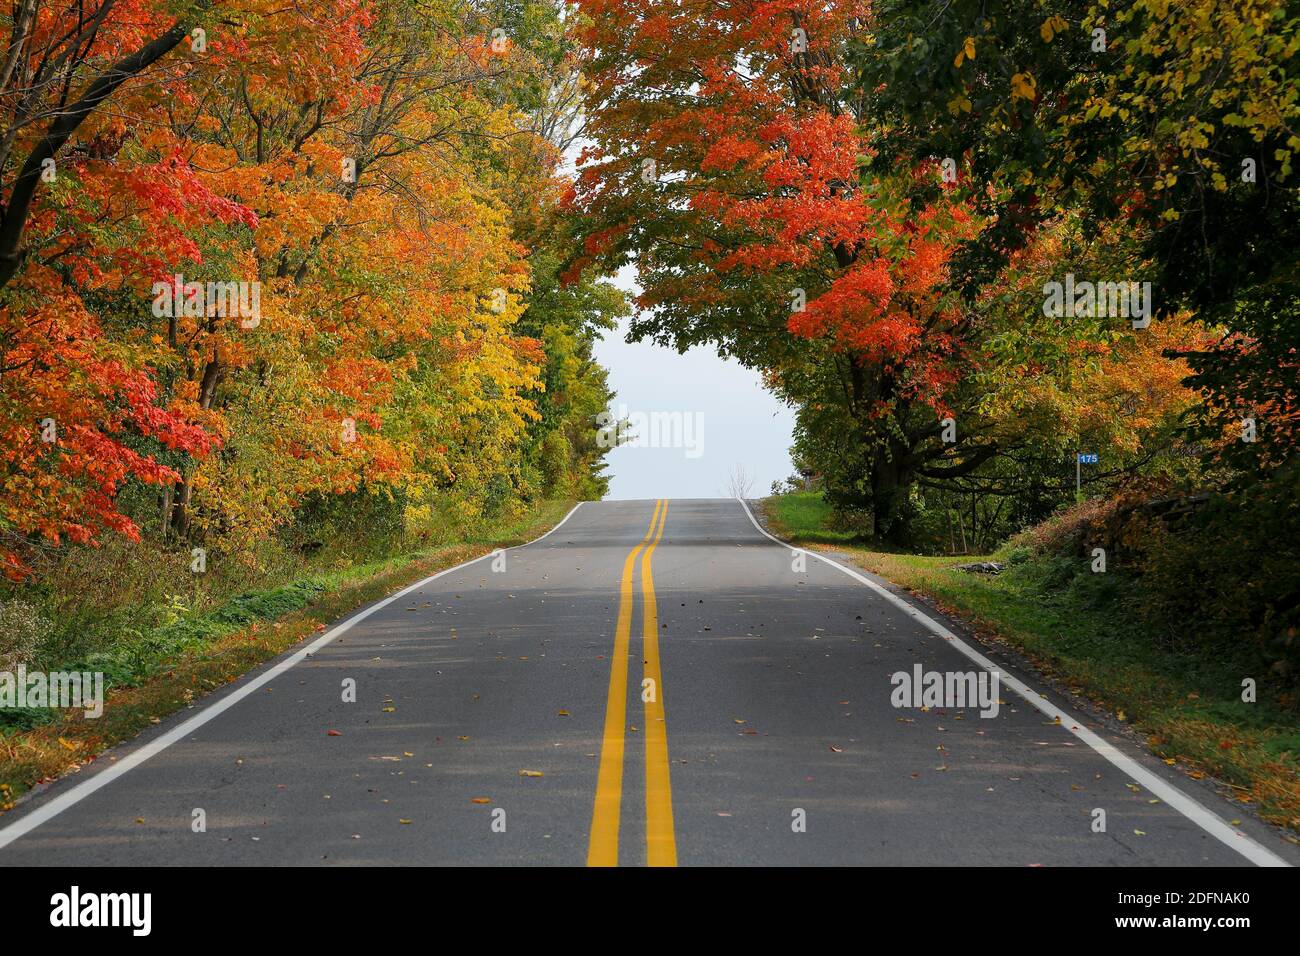 Country road through colourful autumn forest, Indian Summer, Province of Quebec, Canada Stock Photo